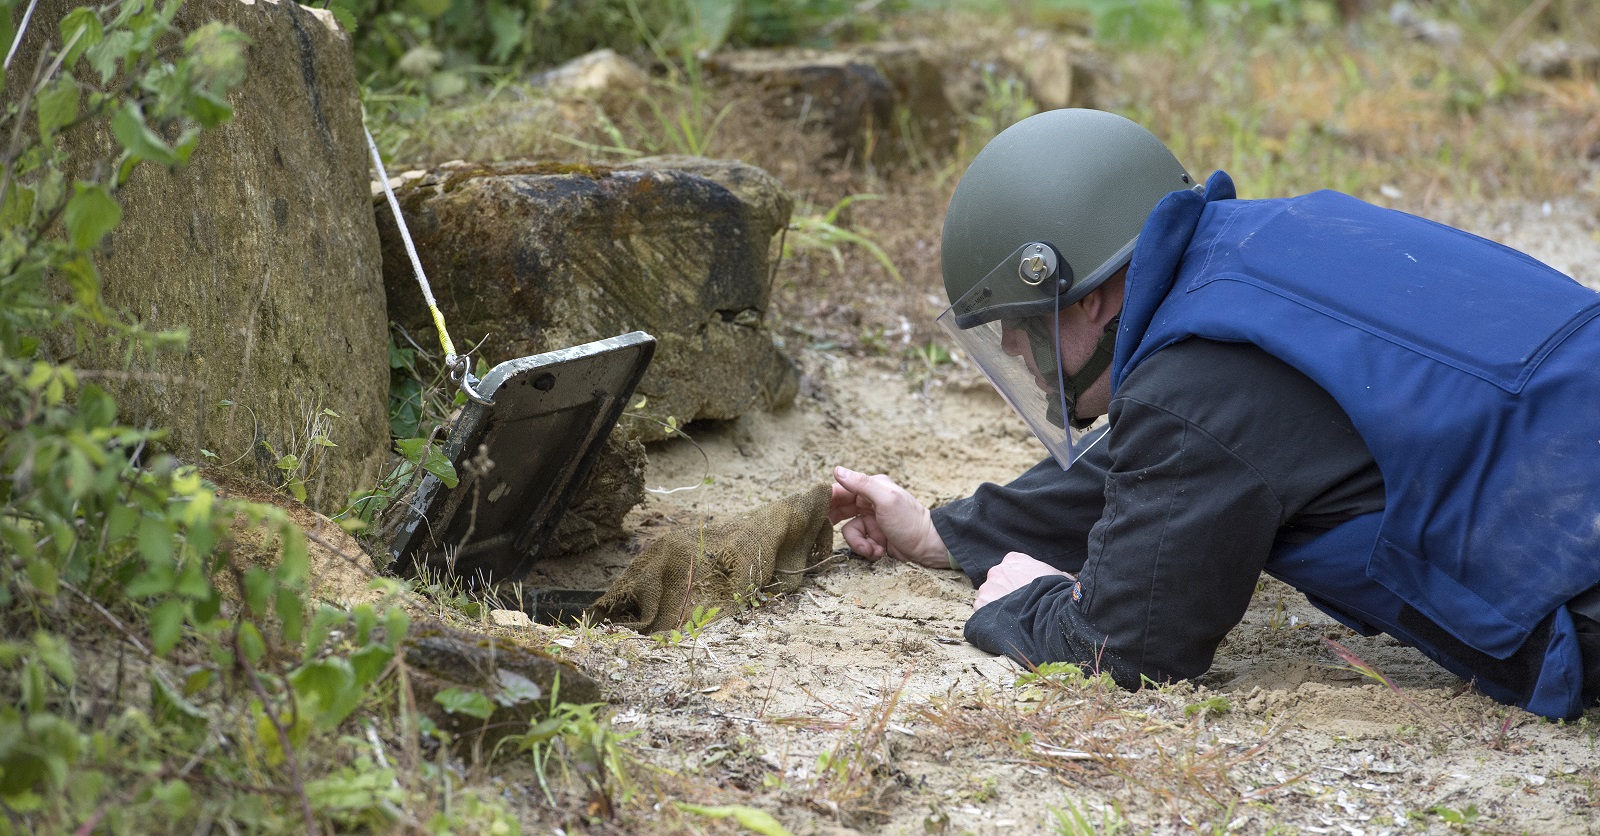 A demining exercise on one of ISSEE's Explosives training courses